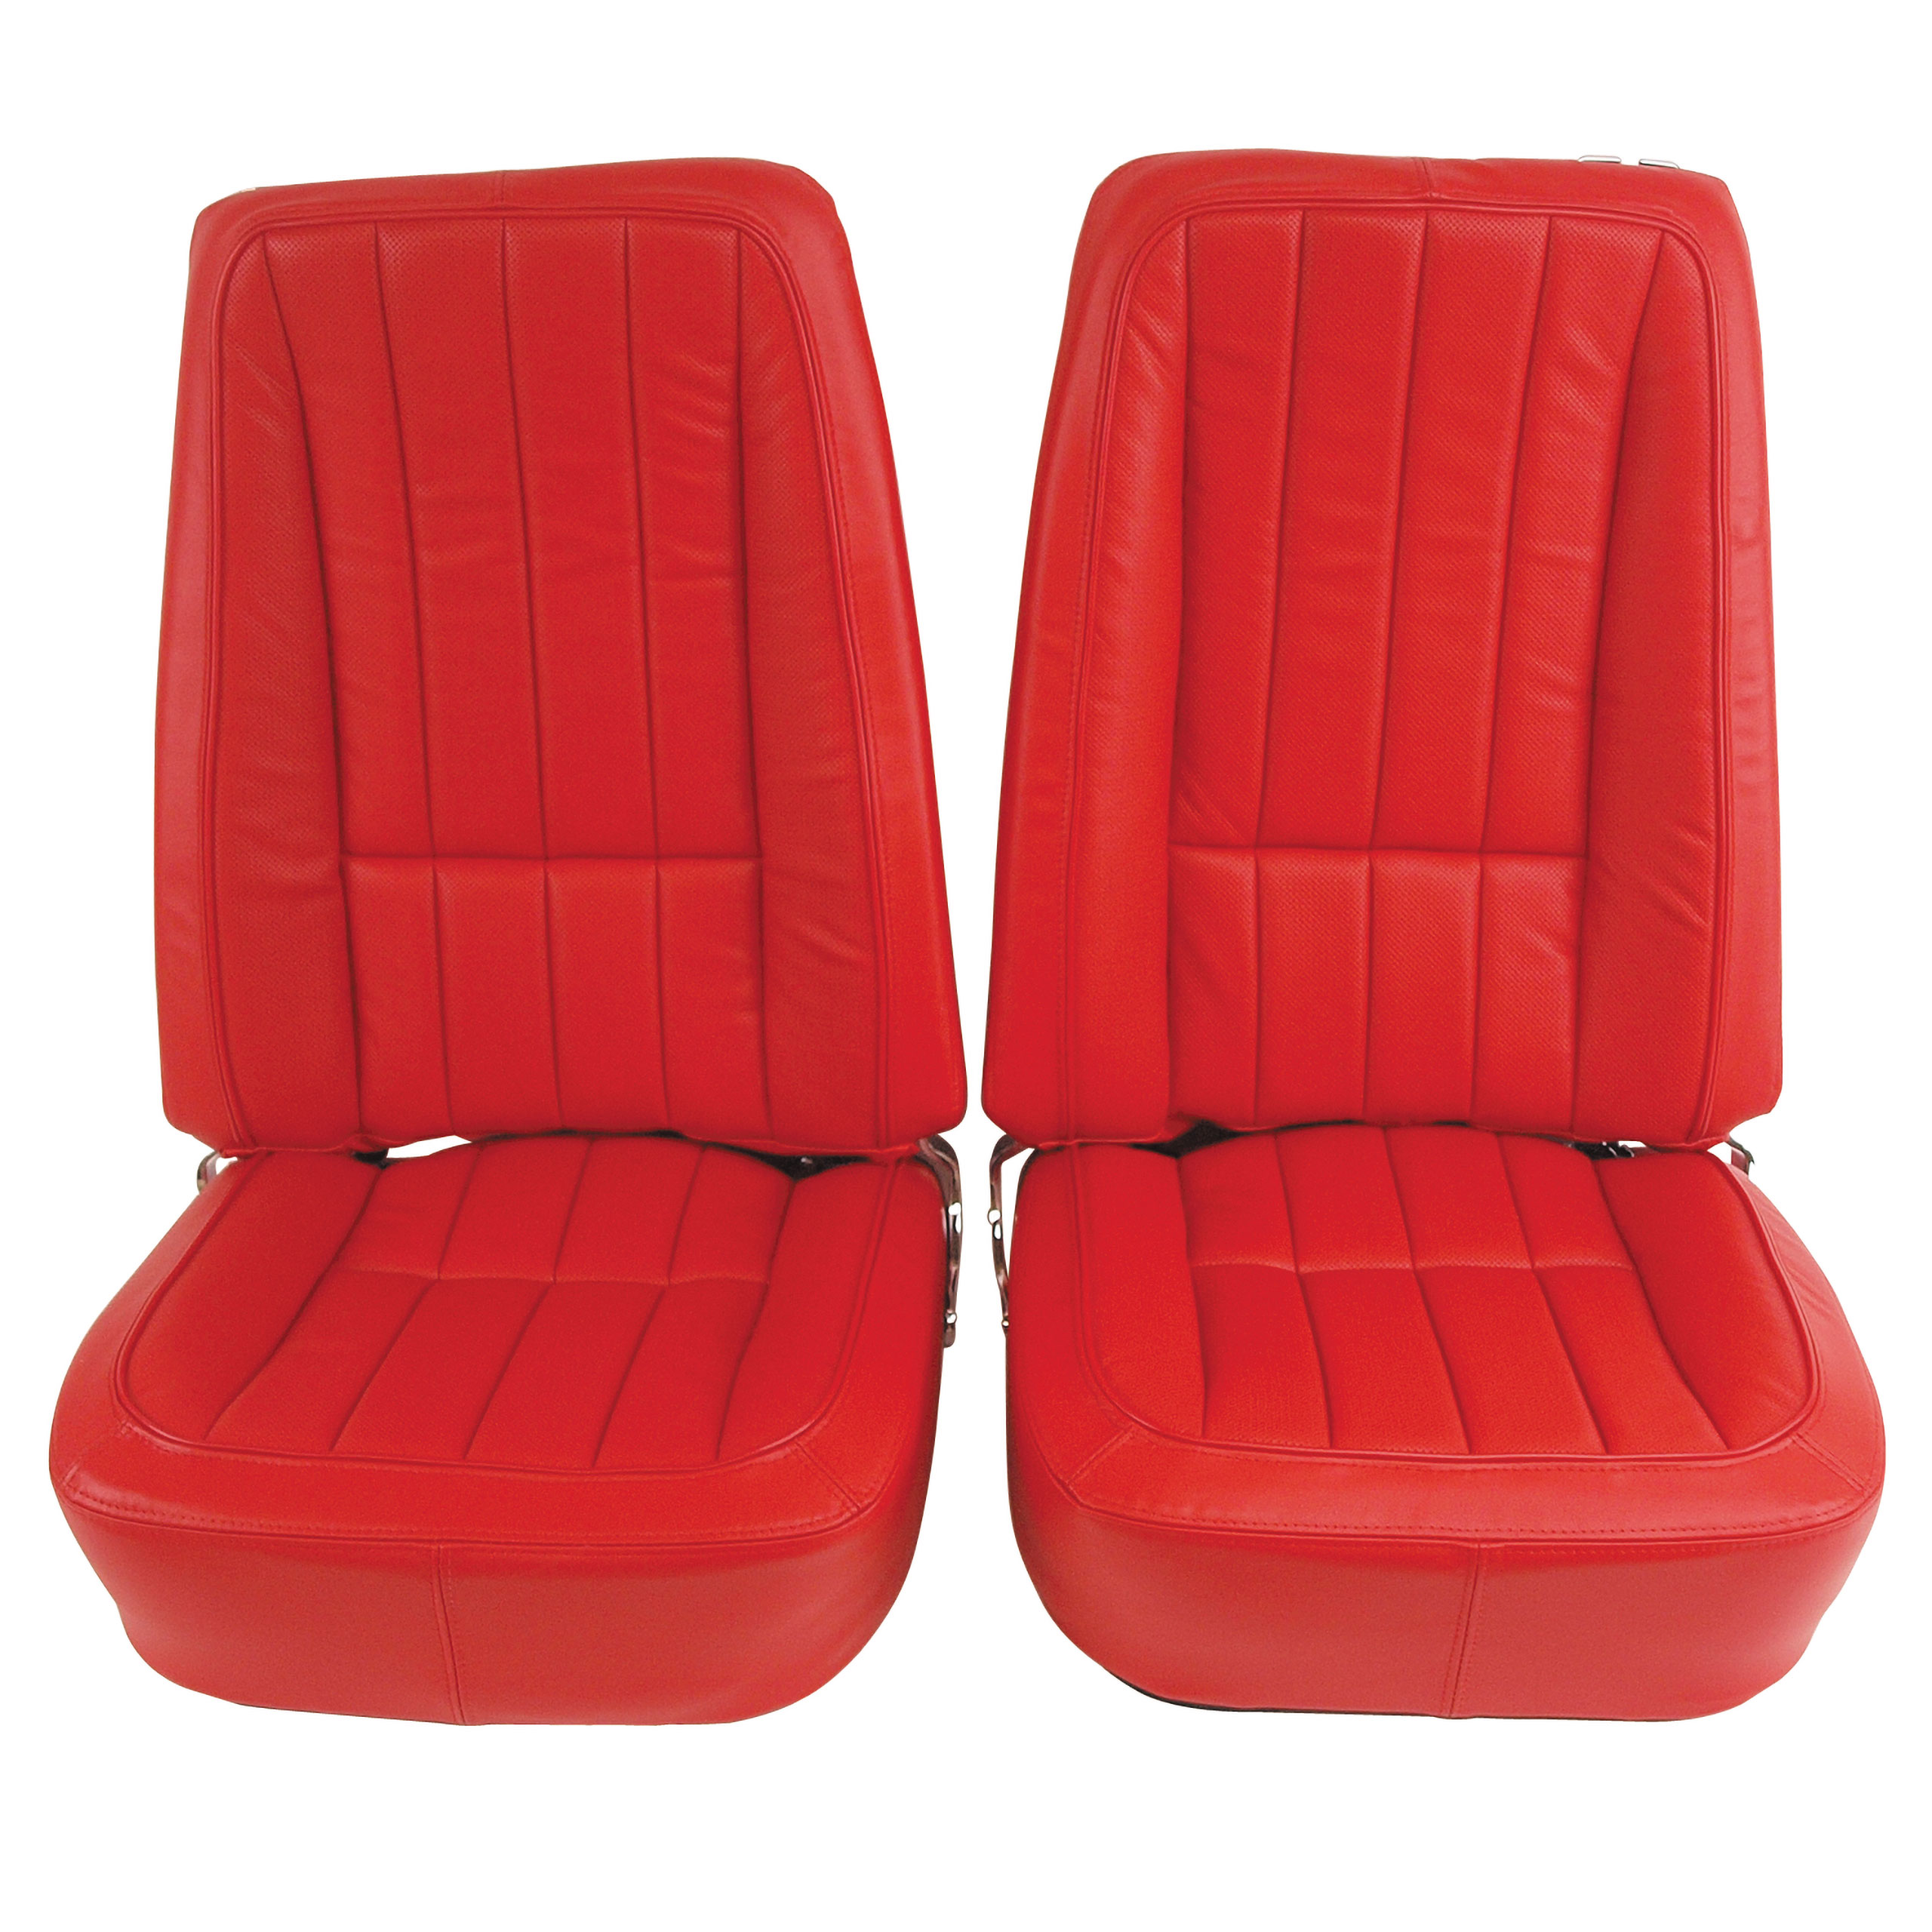 1968 C3 Corvette Mounted Seats Red 100% Leather First Design With Headrest Bracket